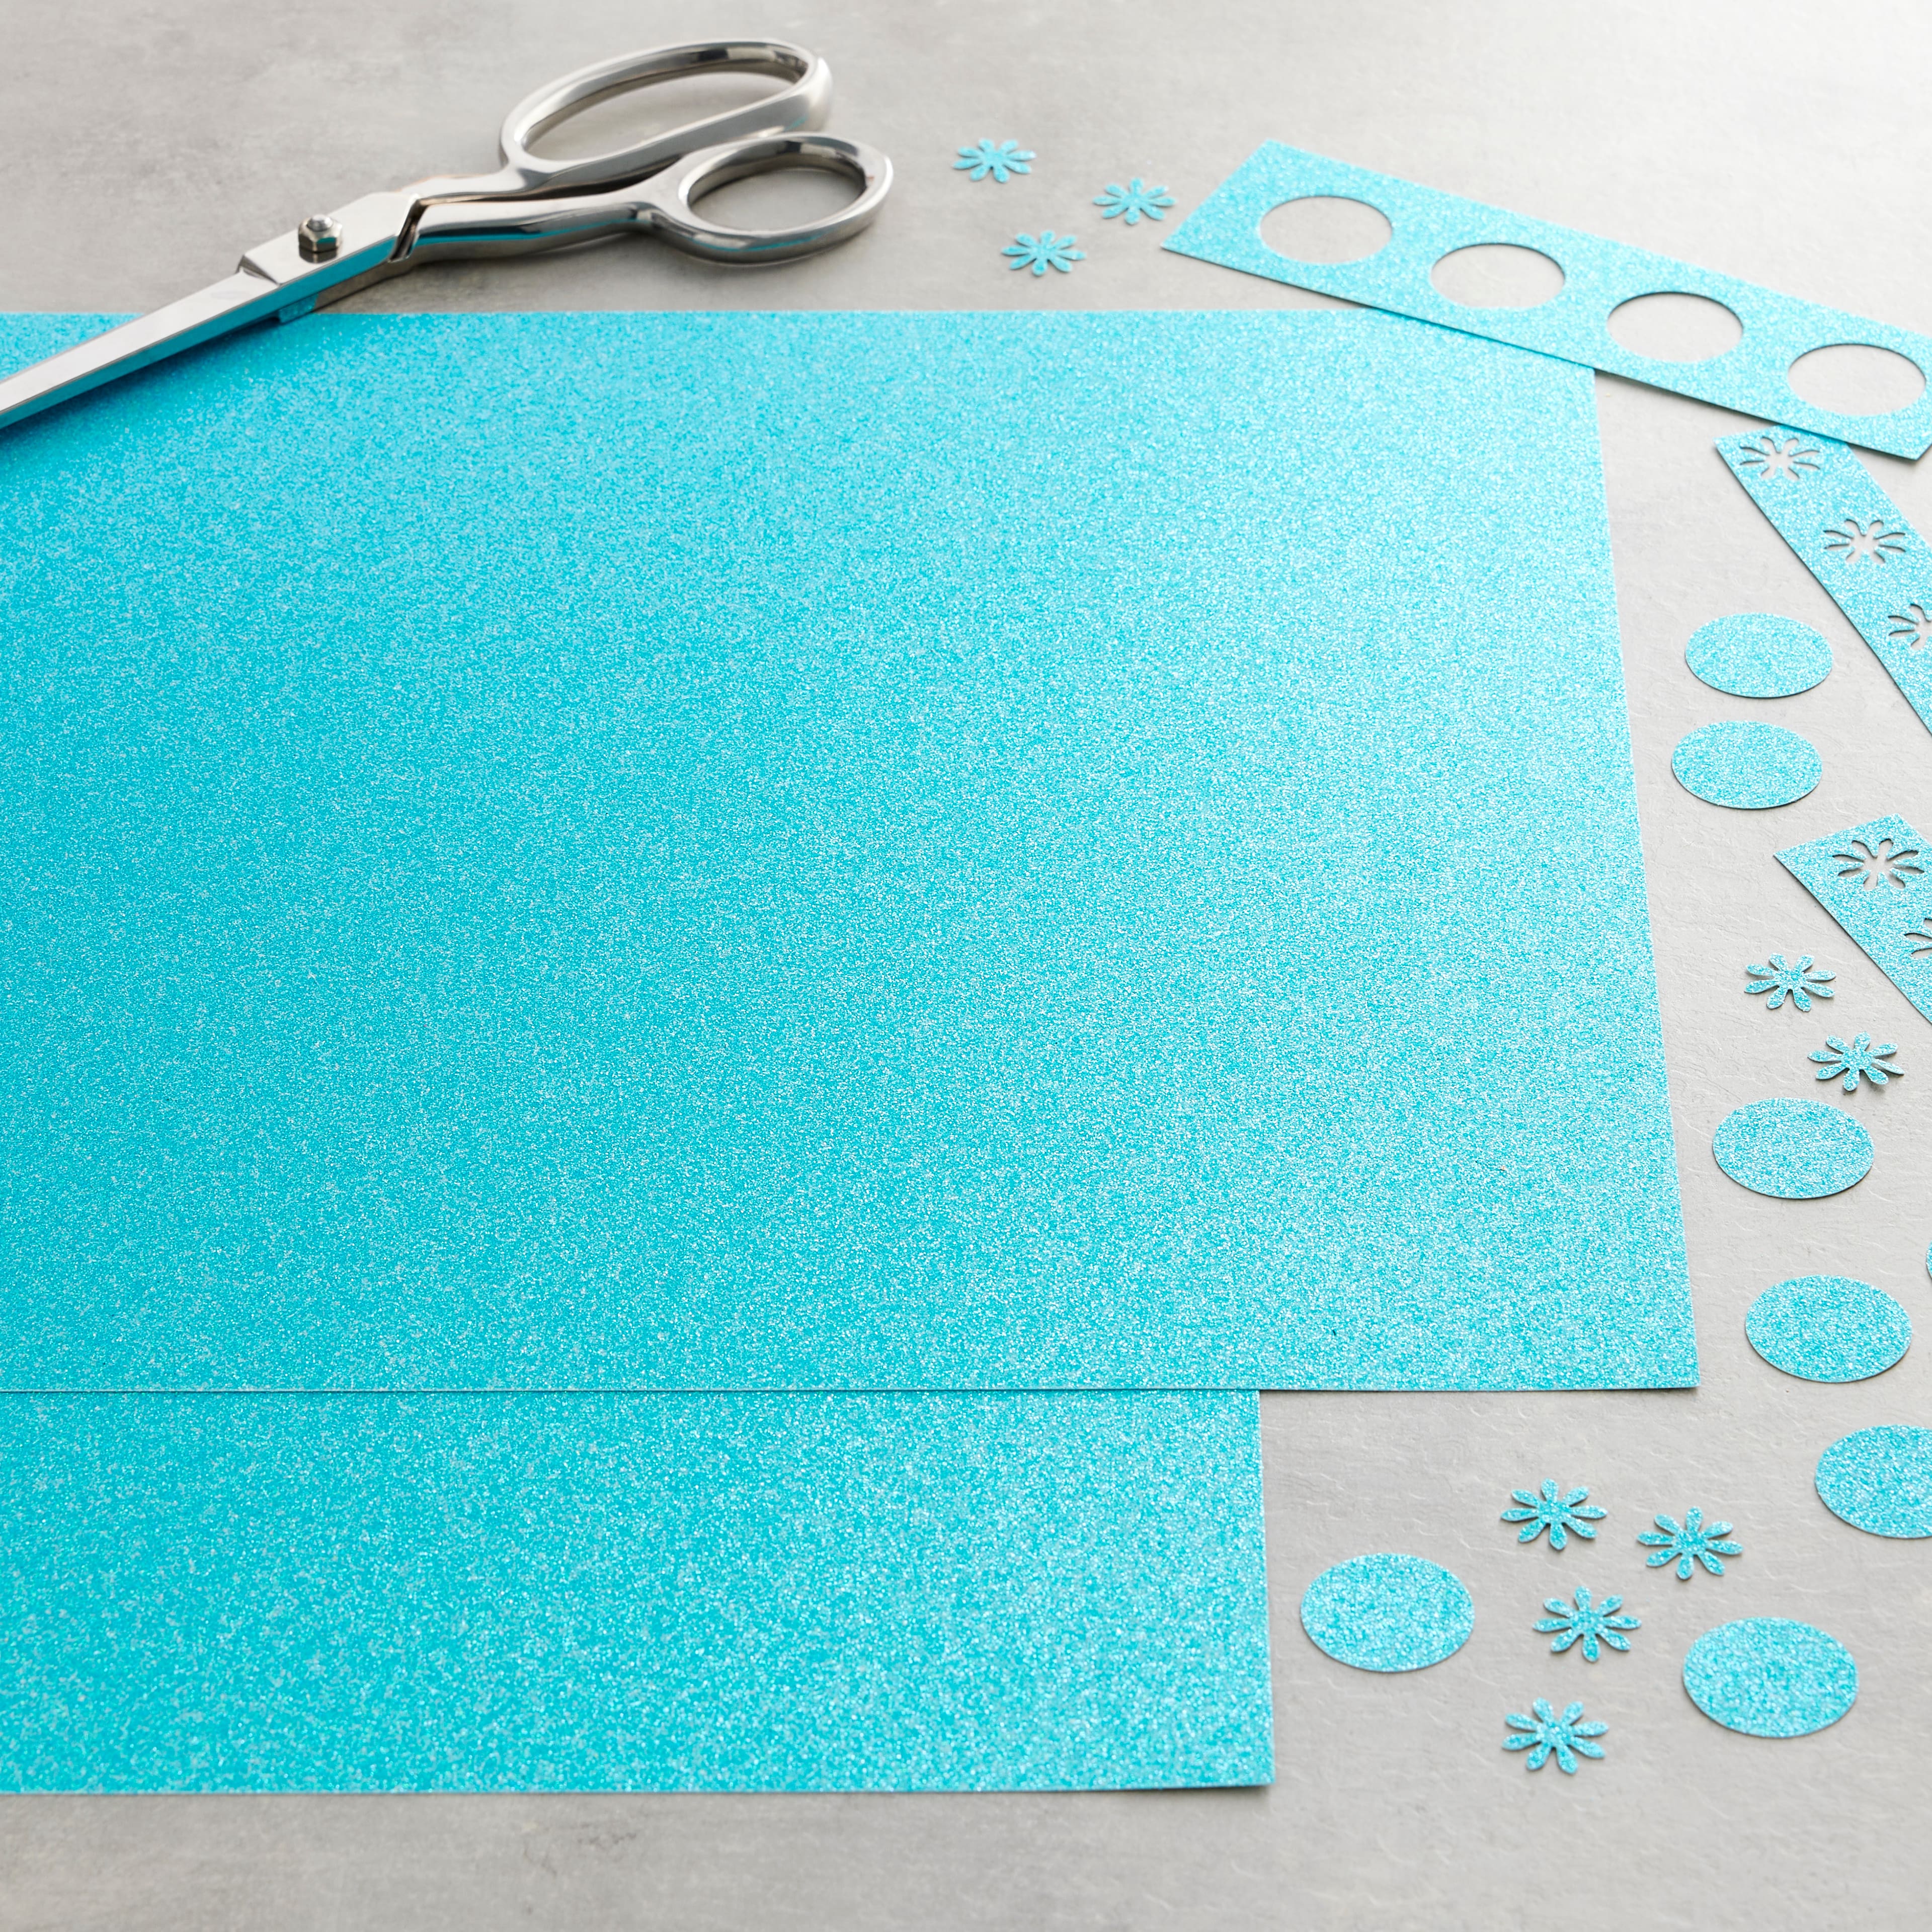 Deal on Glitter Cardstock @Michaels Stores #papercrafters #deal #micha